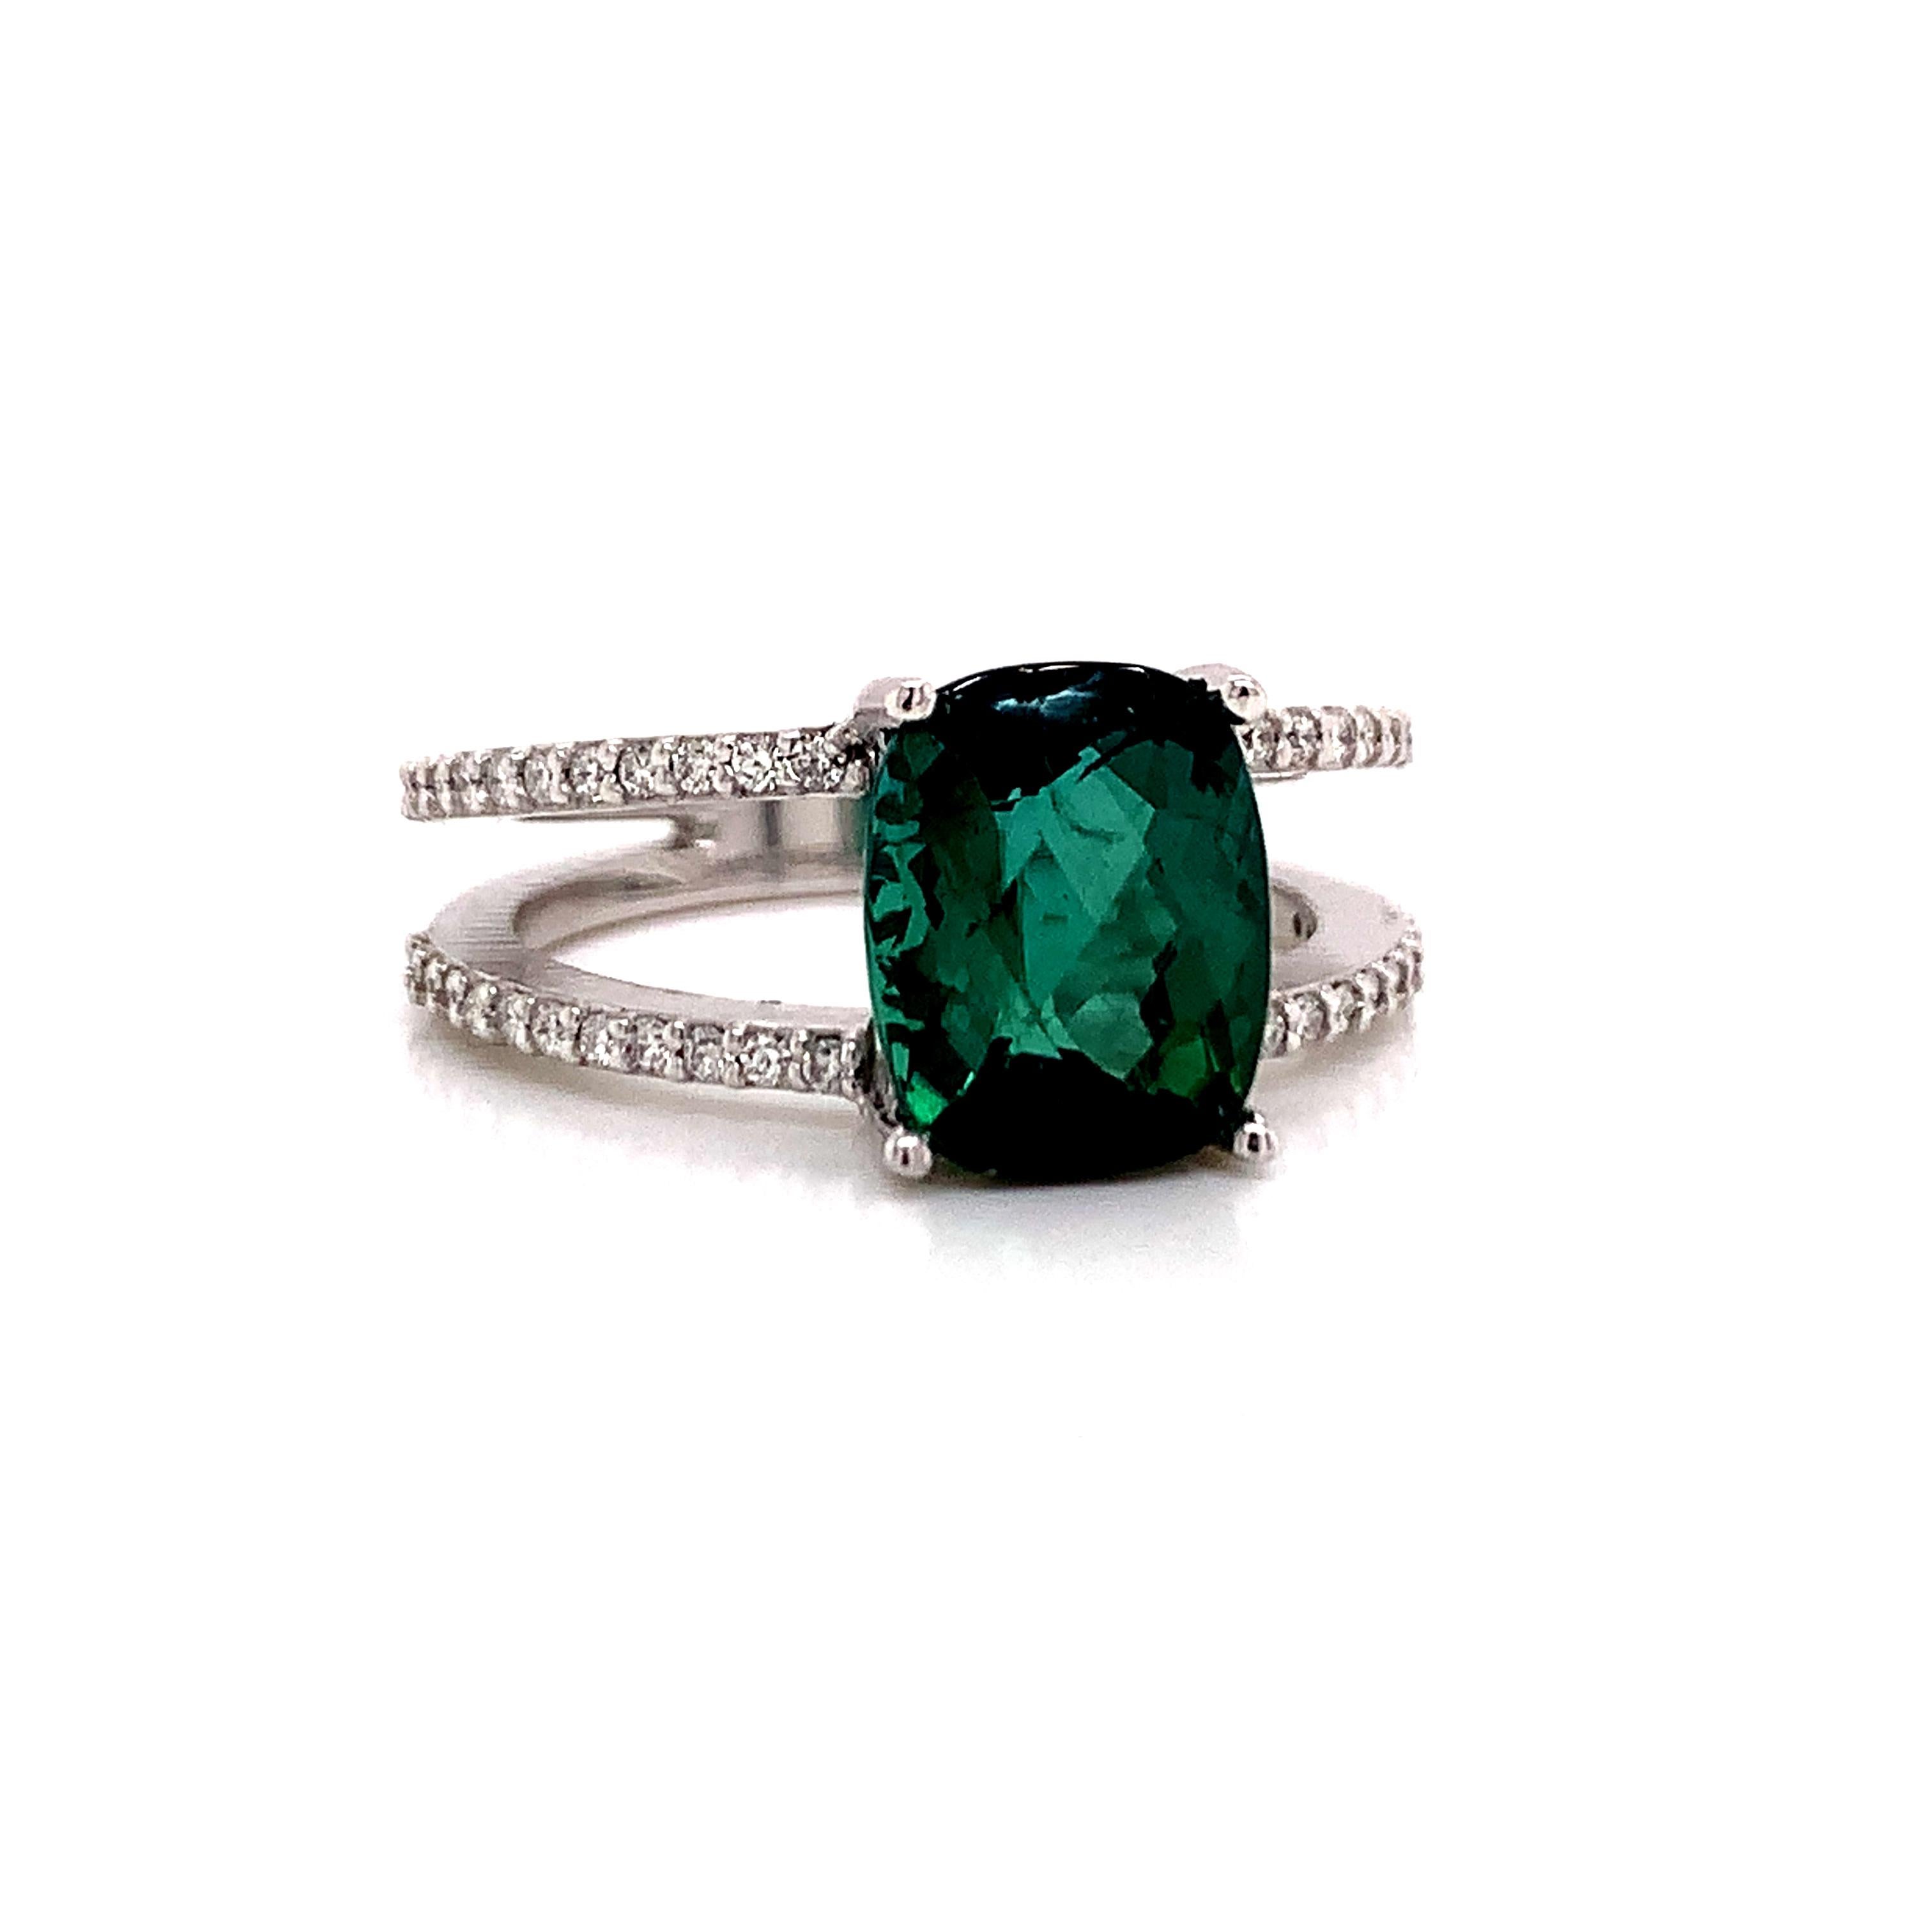 Natural Finely Faceted Quality Tourmaline Diamond Ring 14k WG 3.33 TCW Certified $4,950 111876

This is a one of a Kind Unique Custom Made Glamorous Piece of Jewelry!

Nothing says, “I Love you” more than Diamonds and Pearls!

This item has been